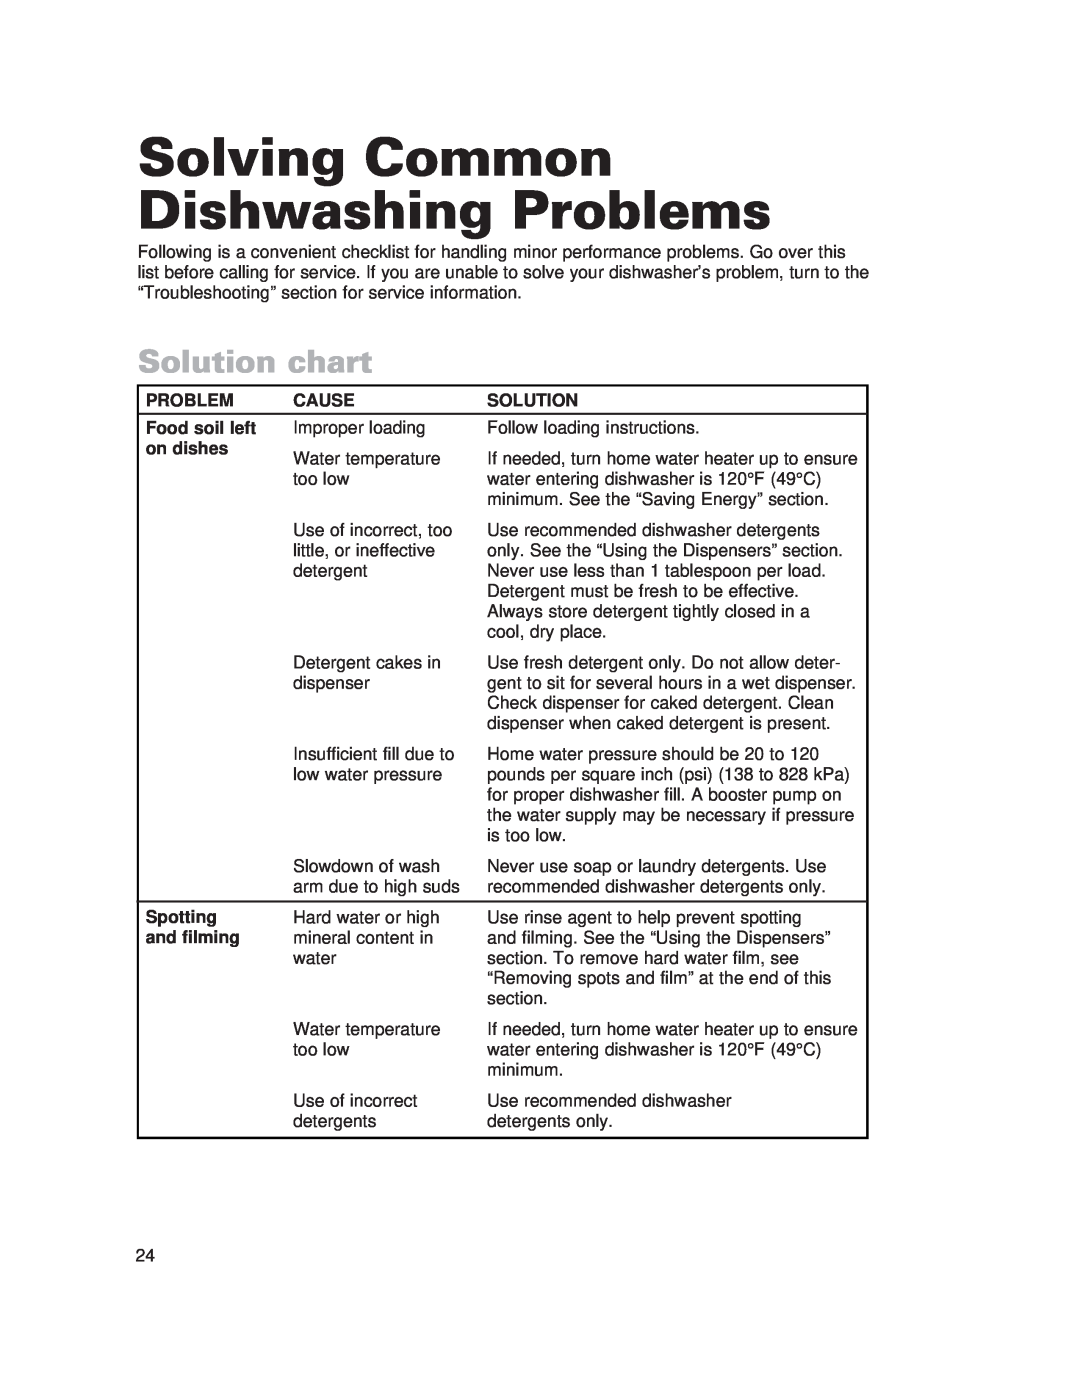 Whirlpool 980 warranty Solving Common Dishwashing Problems, Solution chart 